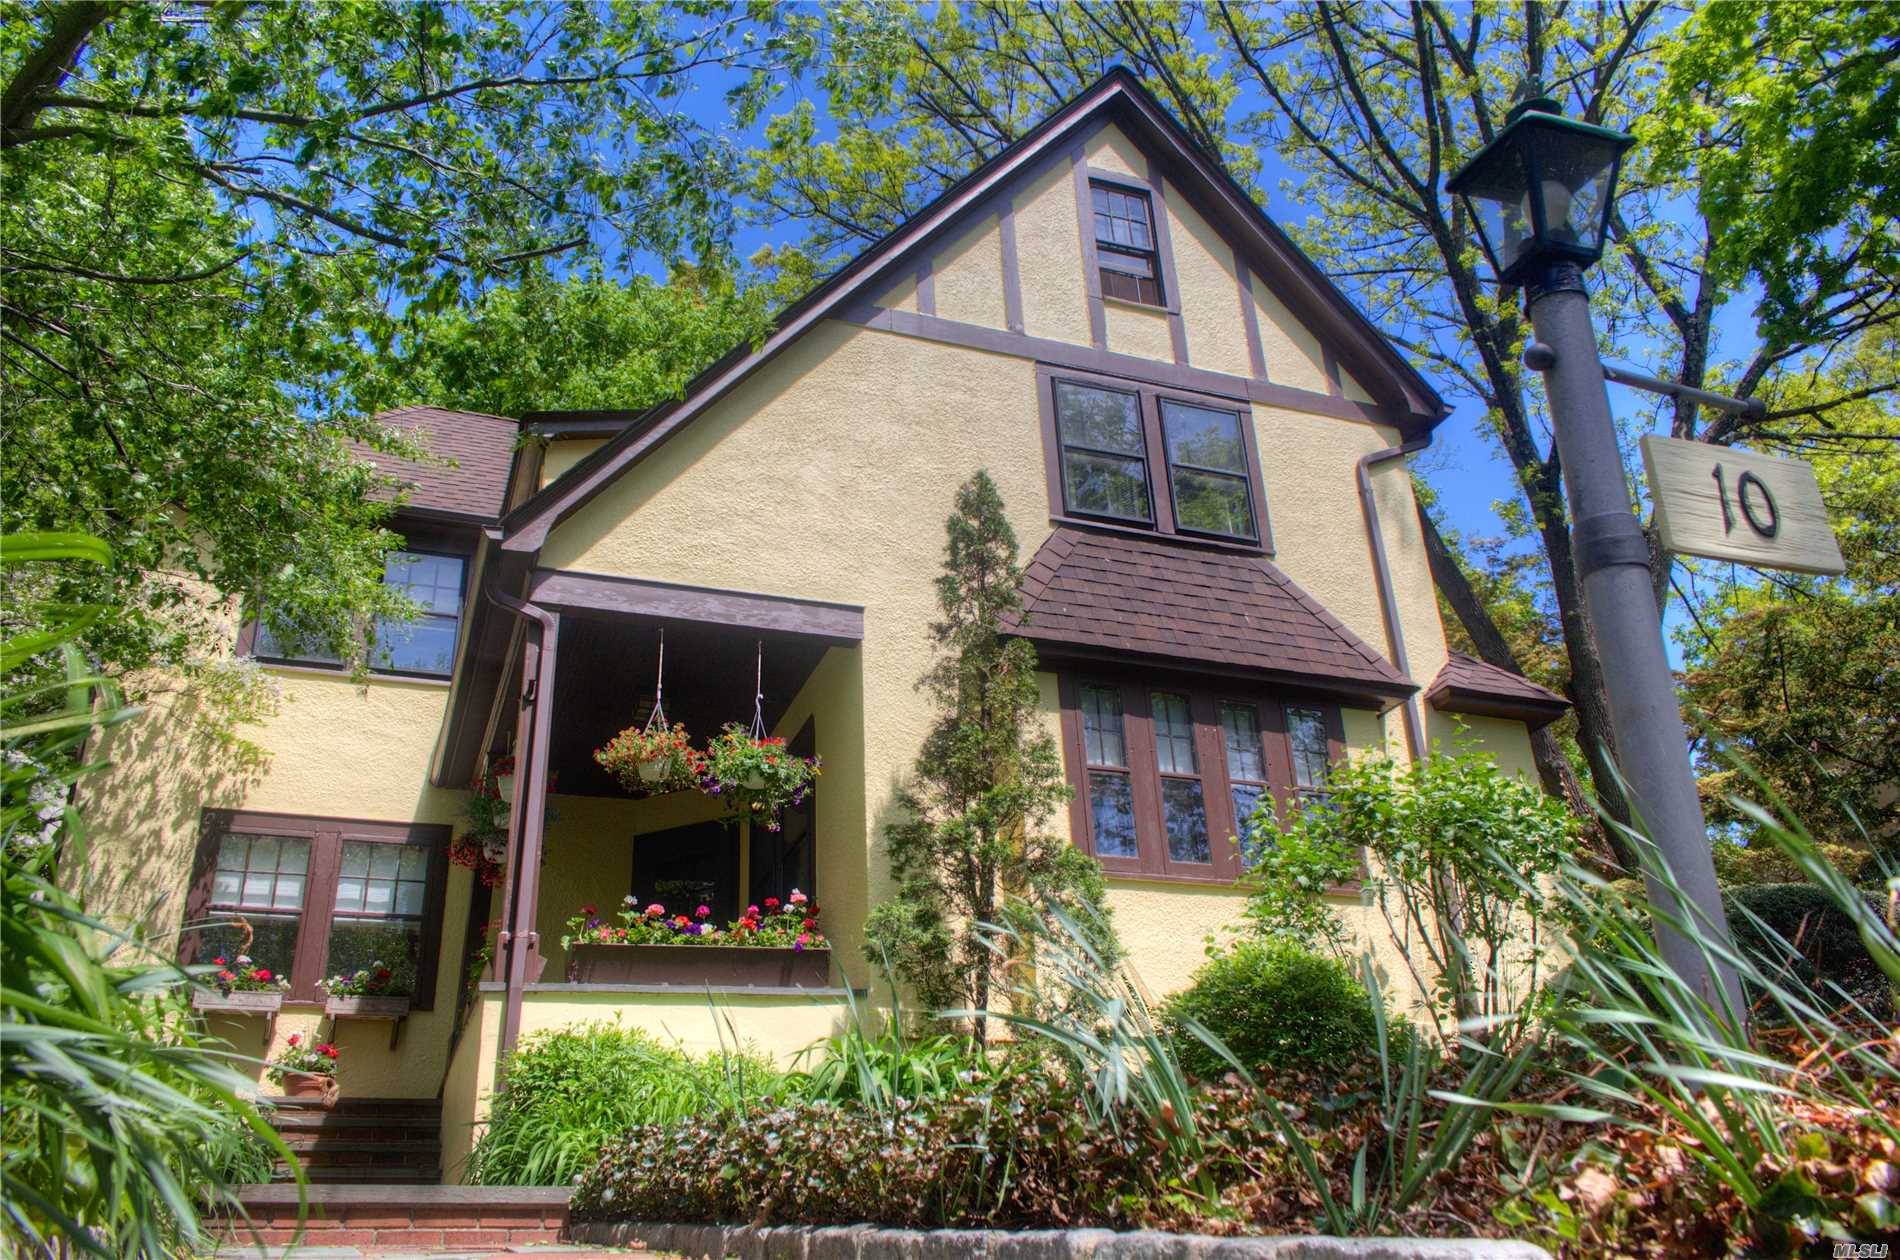 This enchanting tudor with storybook charm sits perched on the hills of Manhasset Bay Estates.